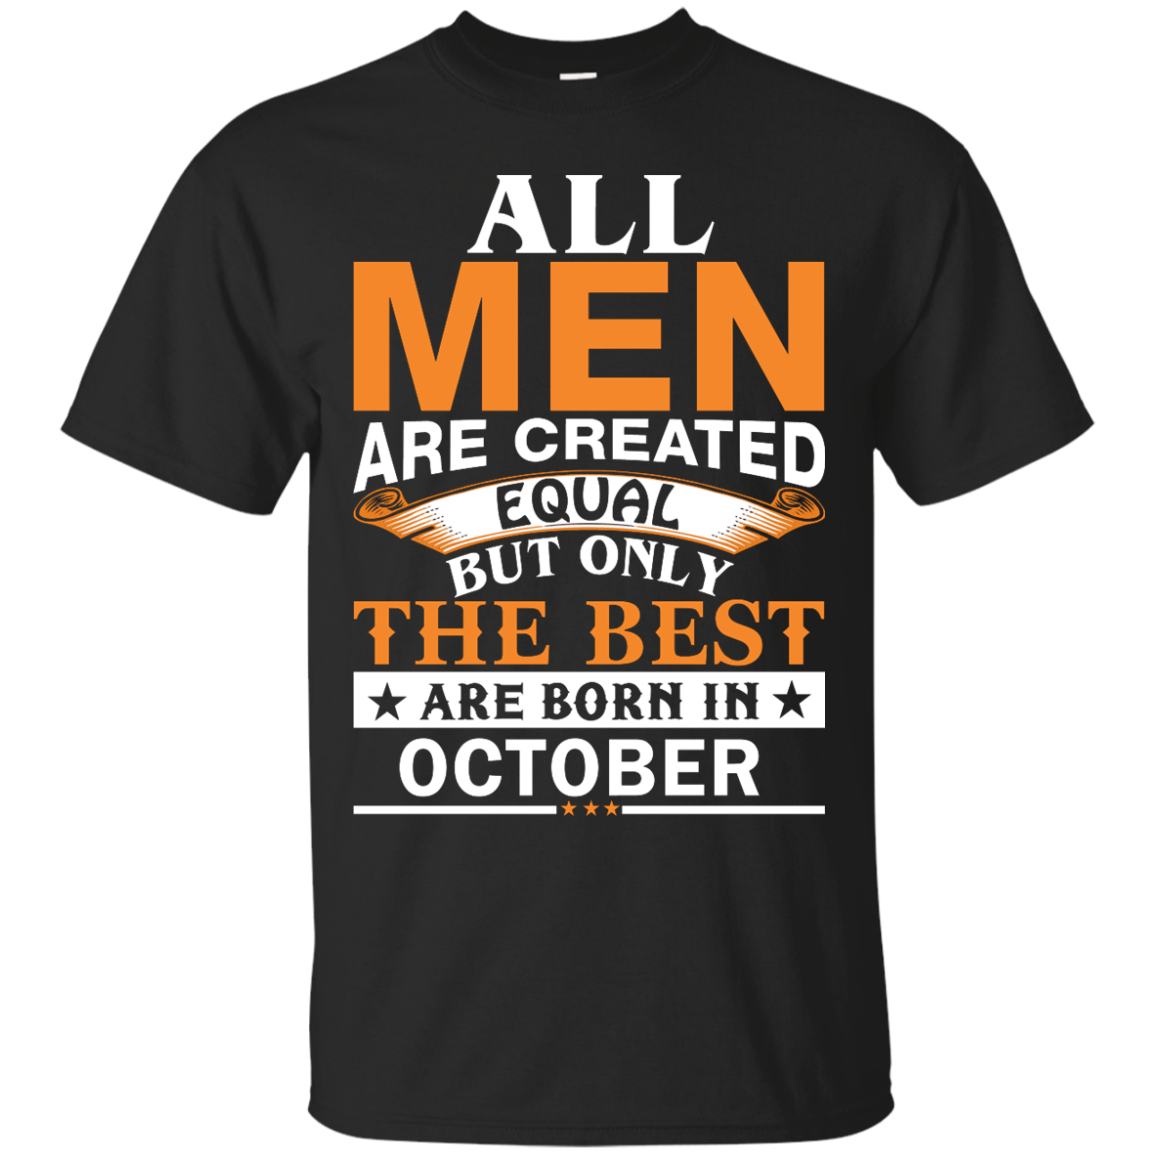 All Men Are Created Equal But Only The Best Are Born in October Shirt ...